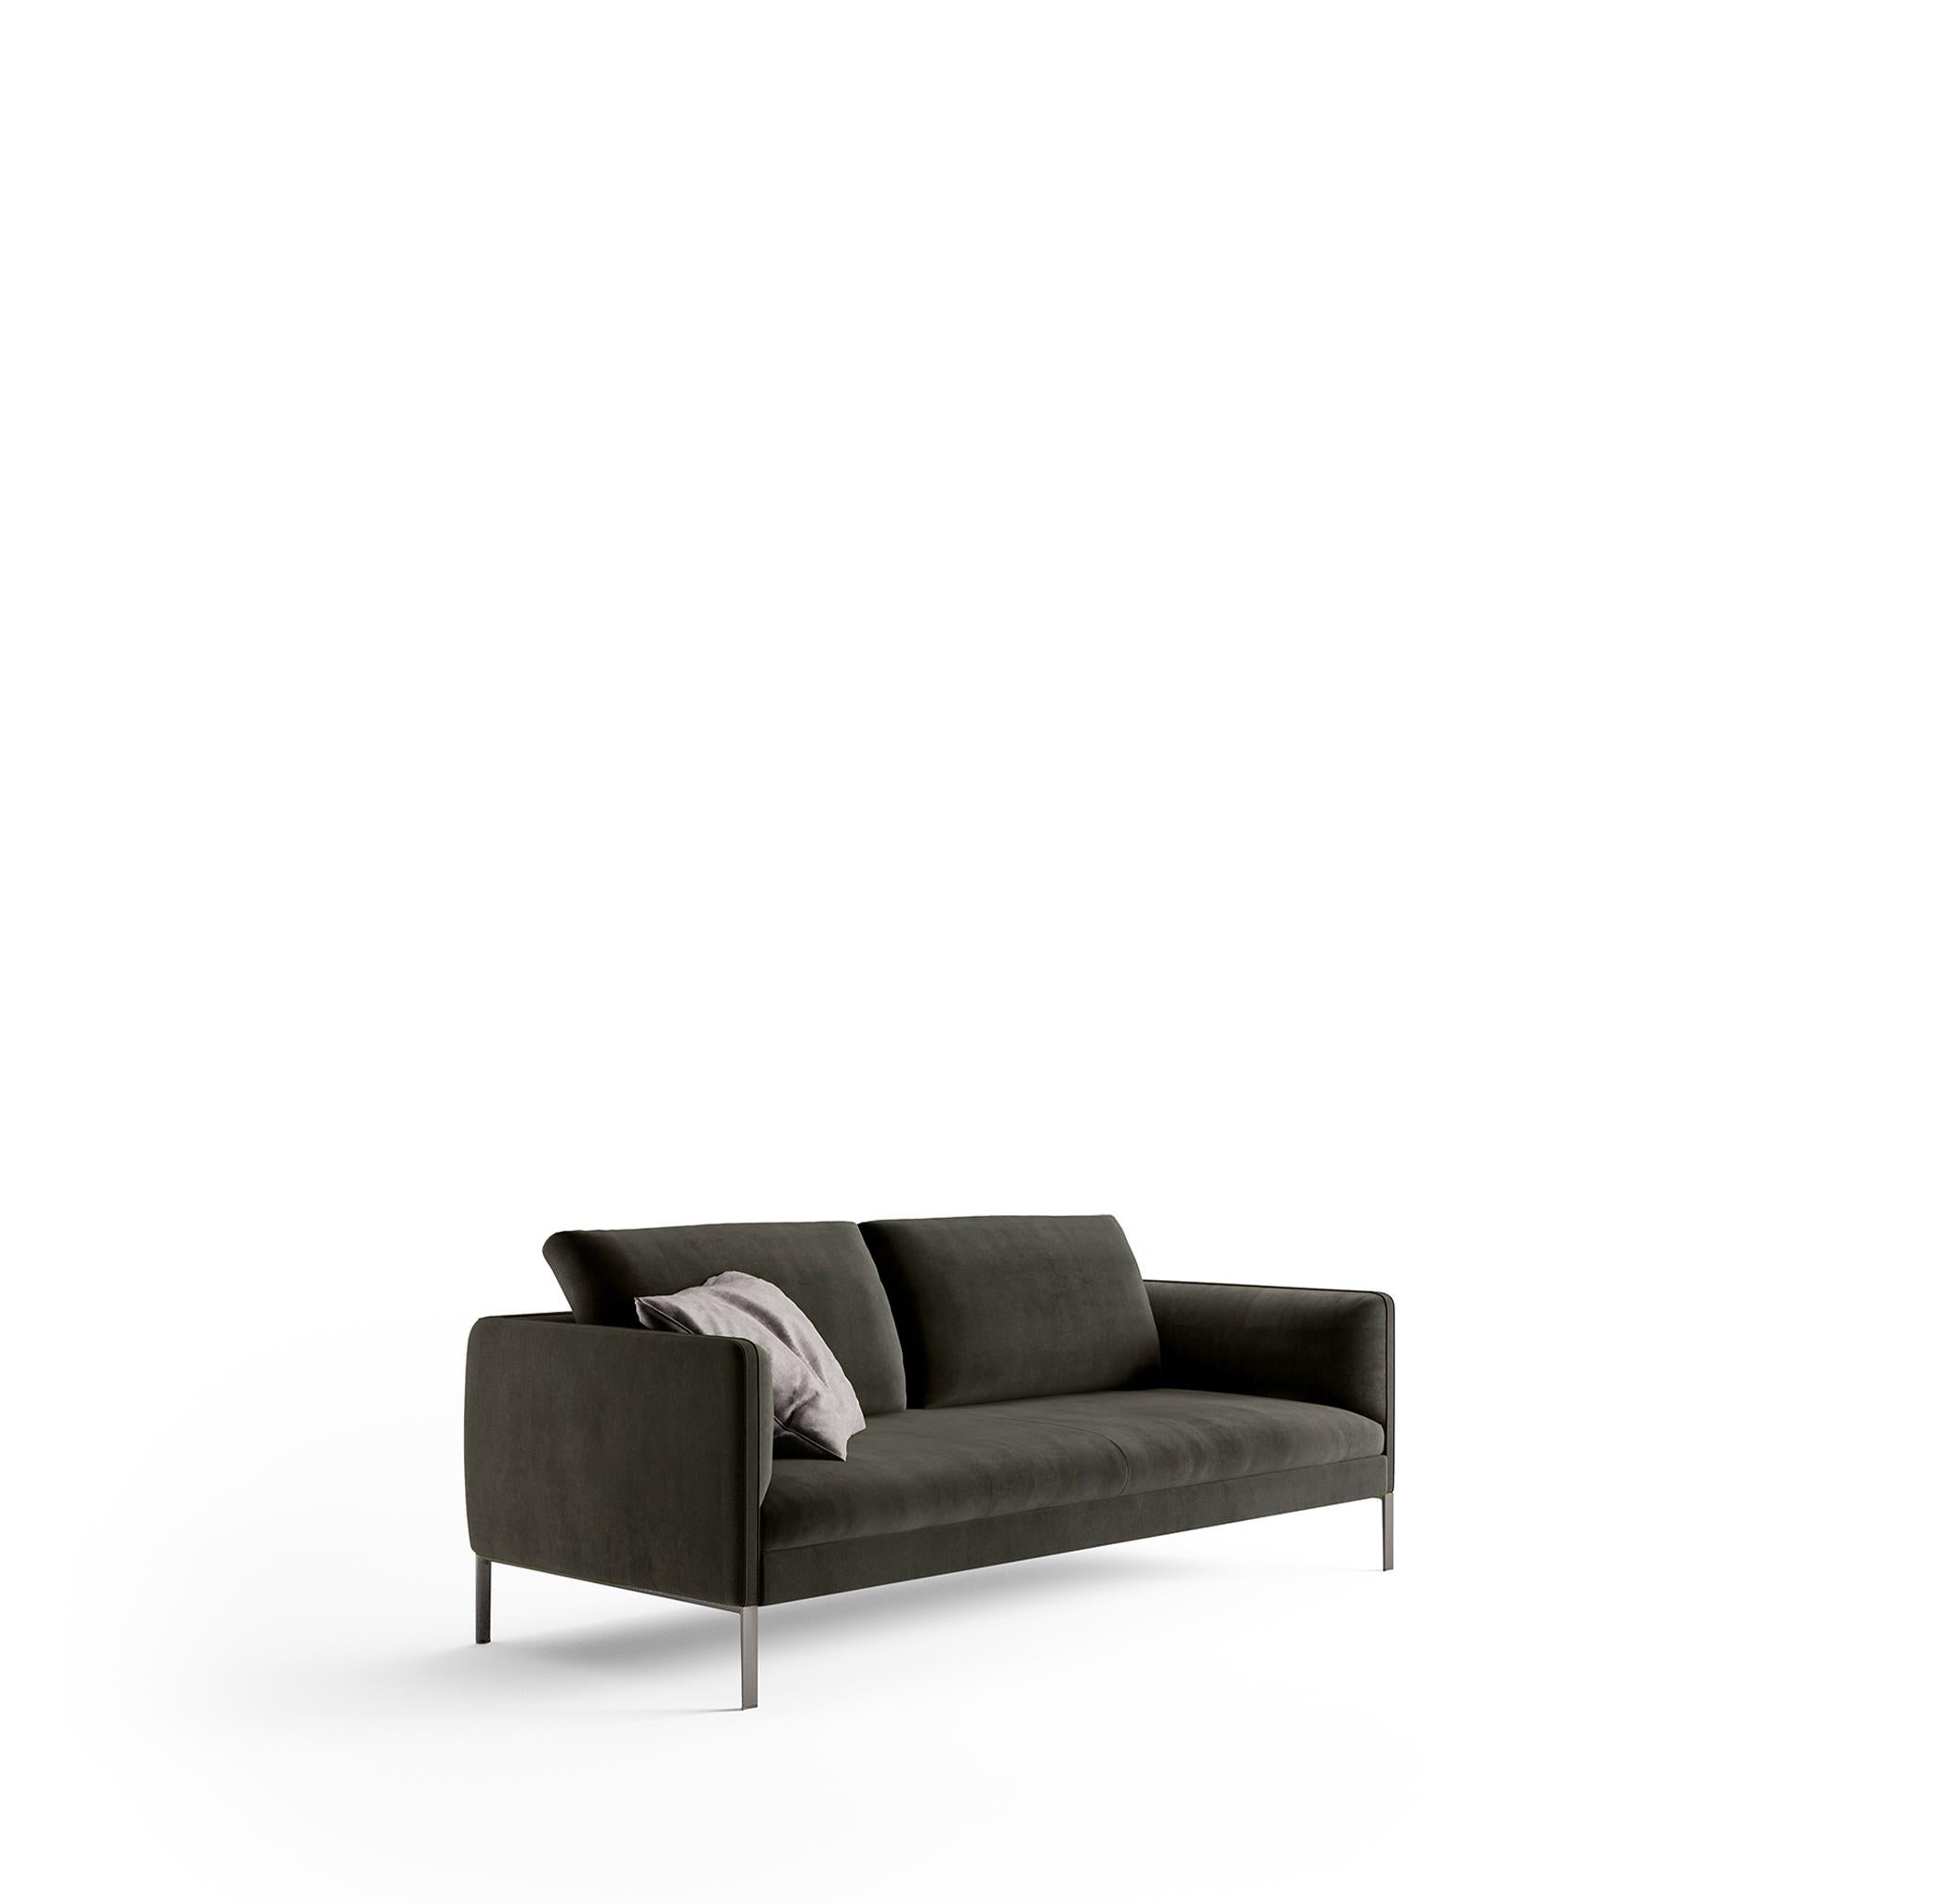 Paul is a linear single-cushion sofa envisioned by Belgian designer Vincent Van Duysen. Strong lines and angles are contrasted by buttery soft velvet to create a piece characterized by comfort and understated elegance. A luxurious sofa that is